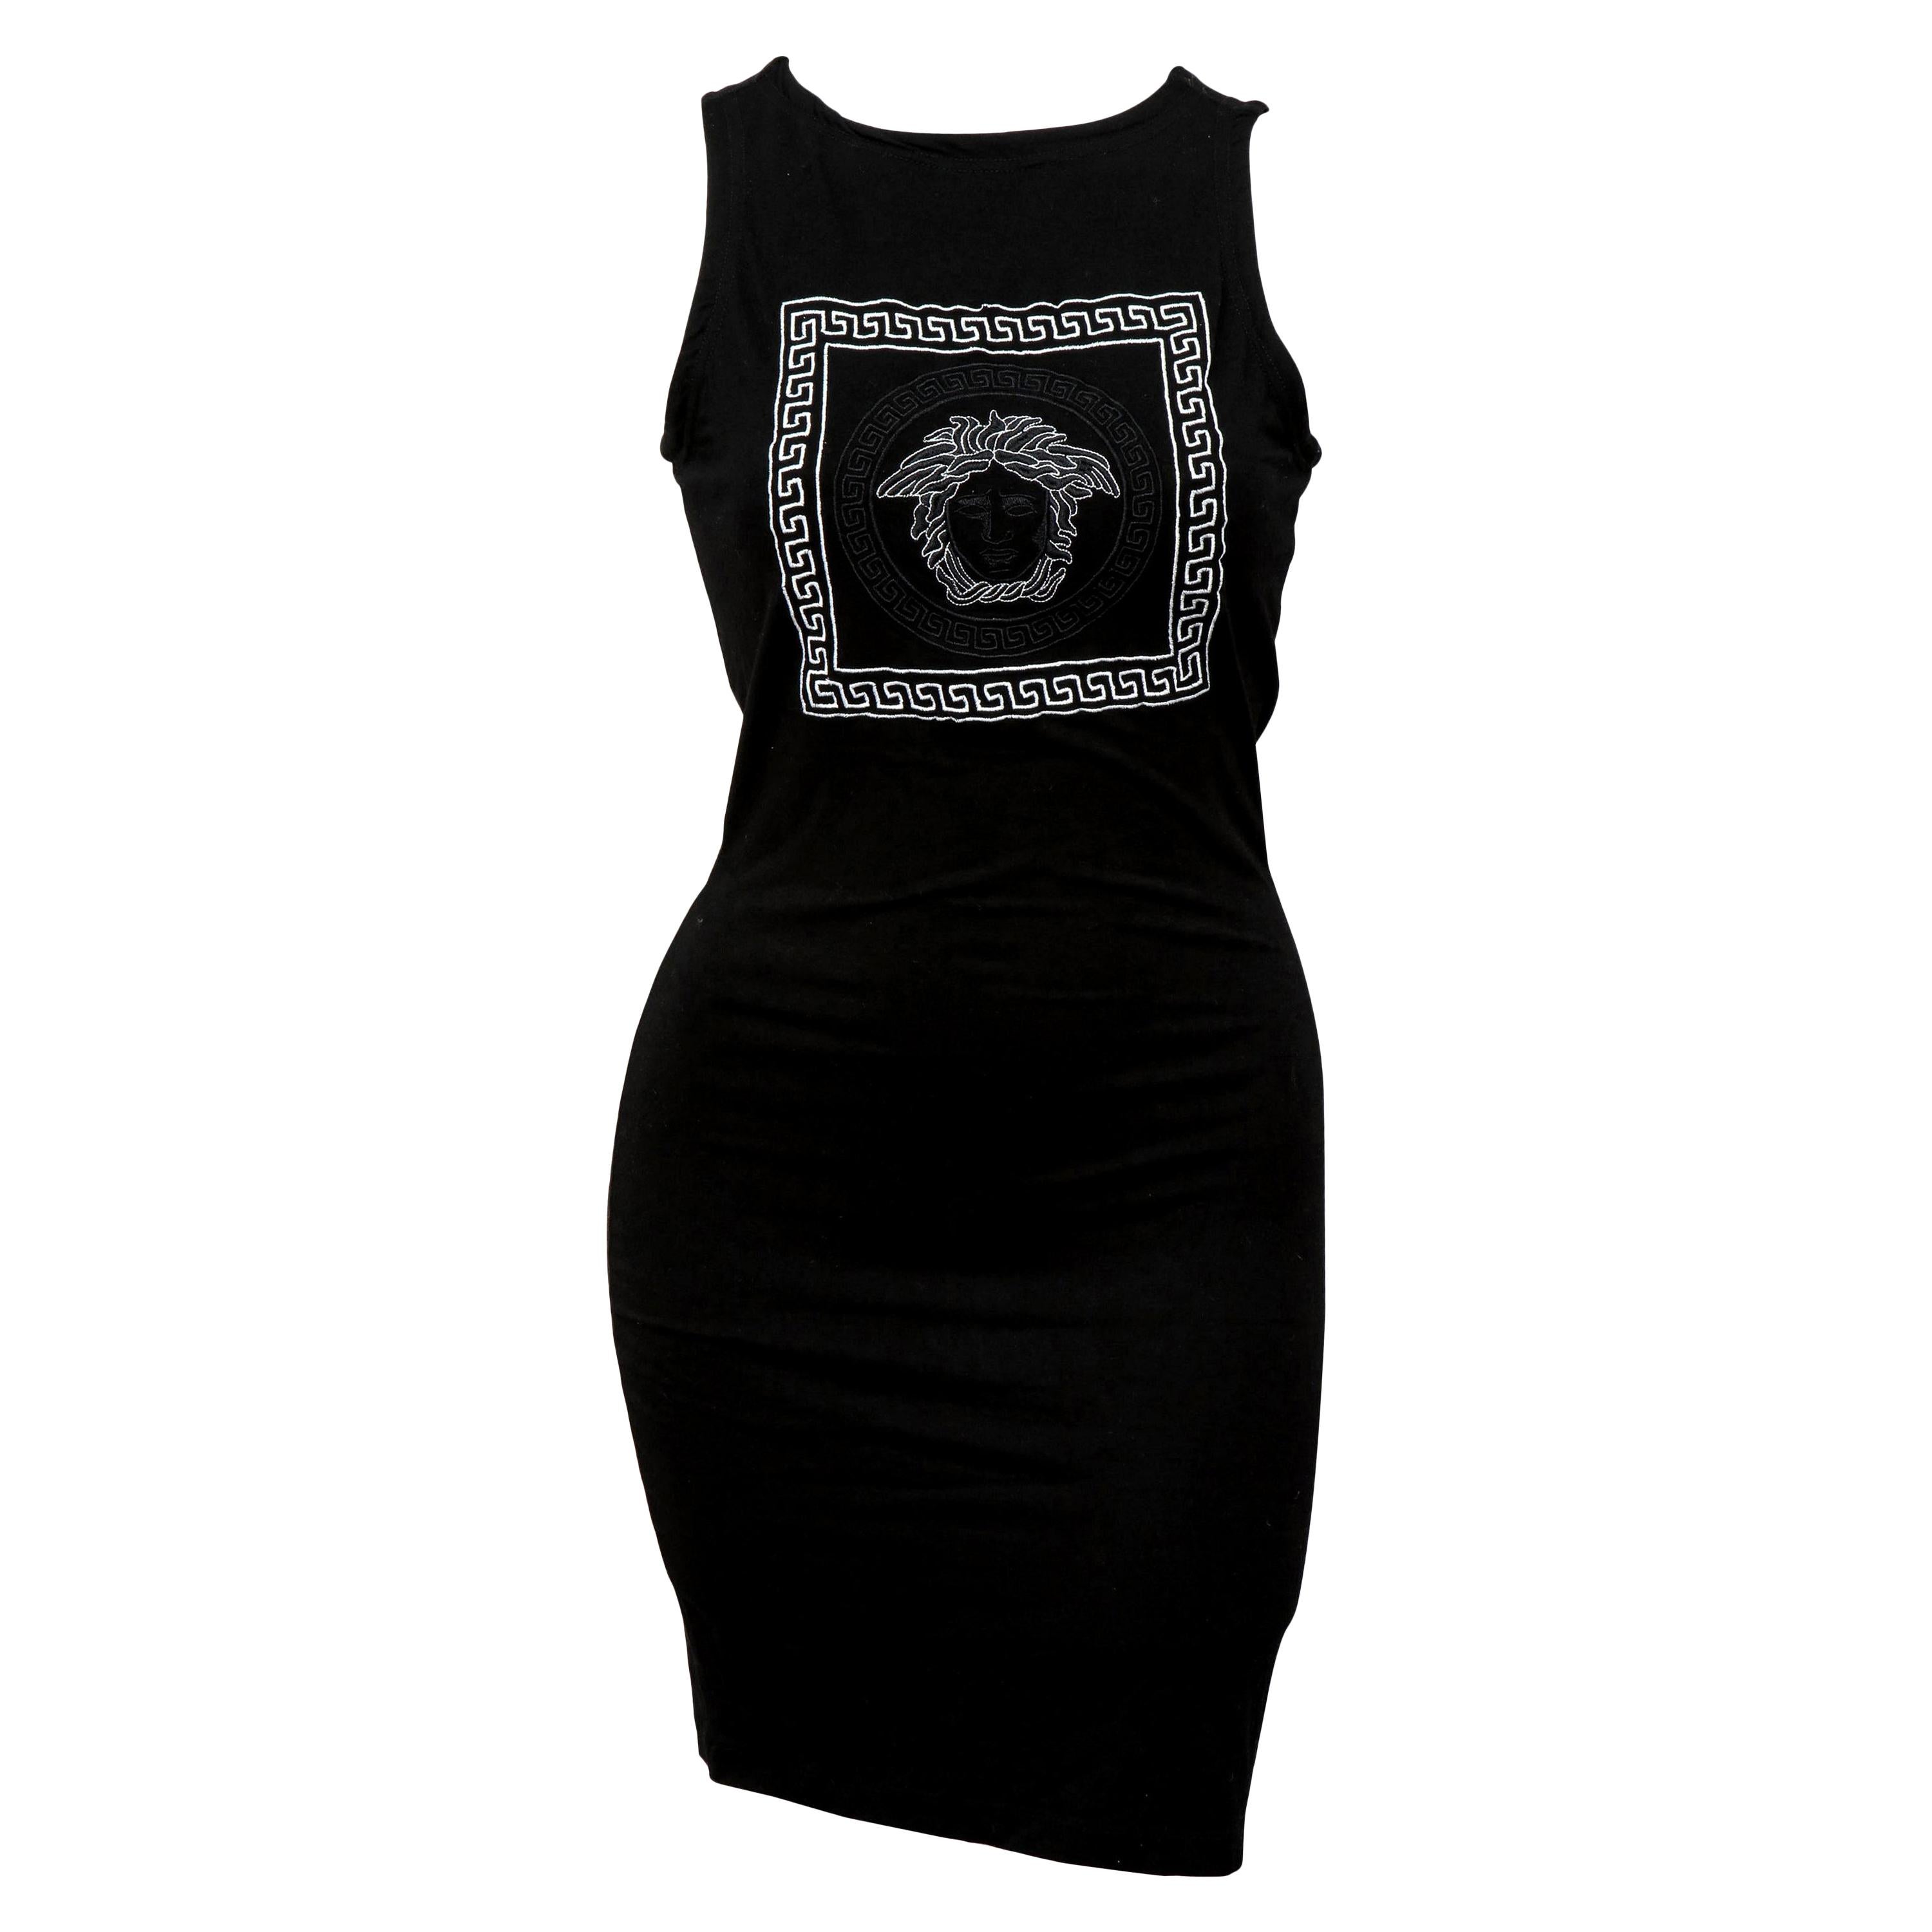 Versace Jeans Couture Black Body Con Dress with Medusa For Sale